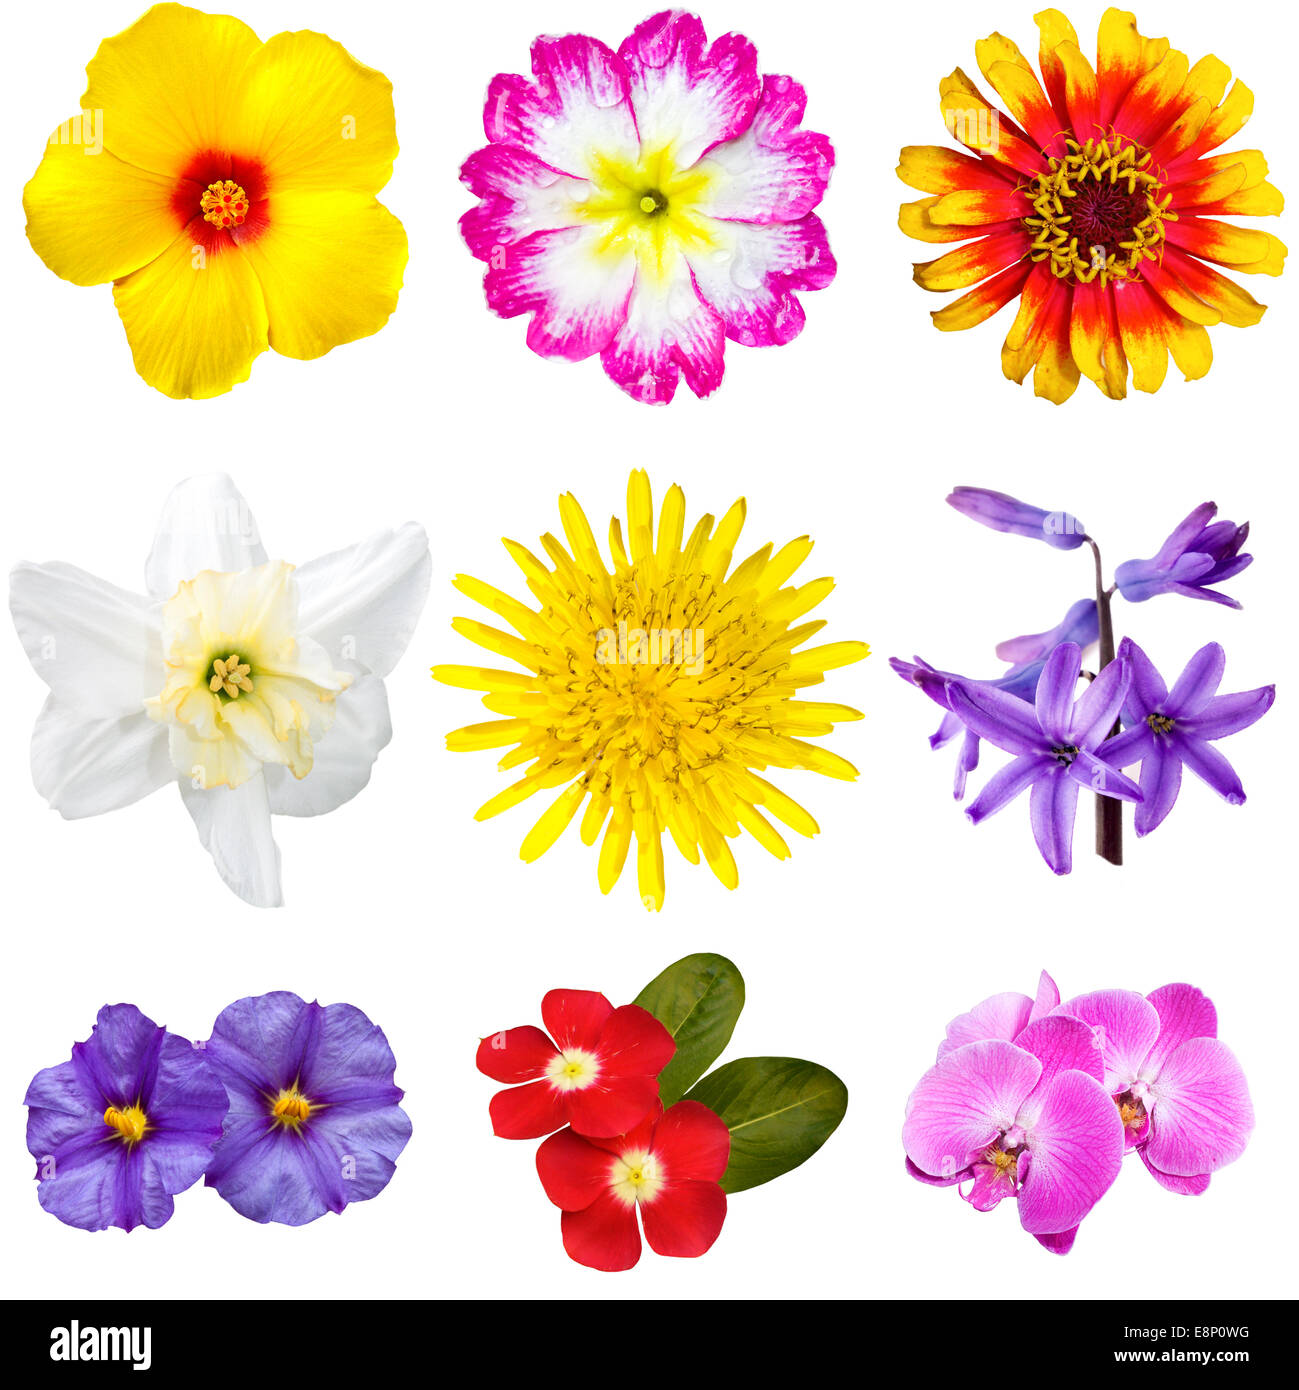 Colorful Flowers Cutouts Stock Photo